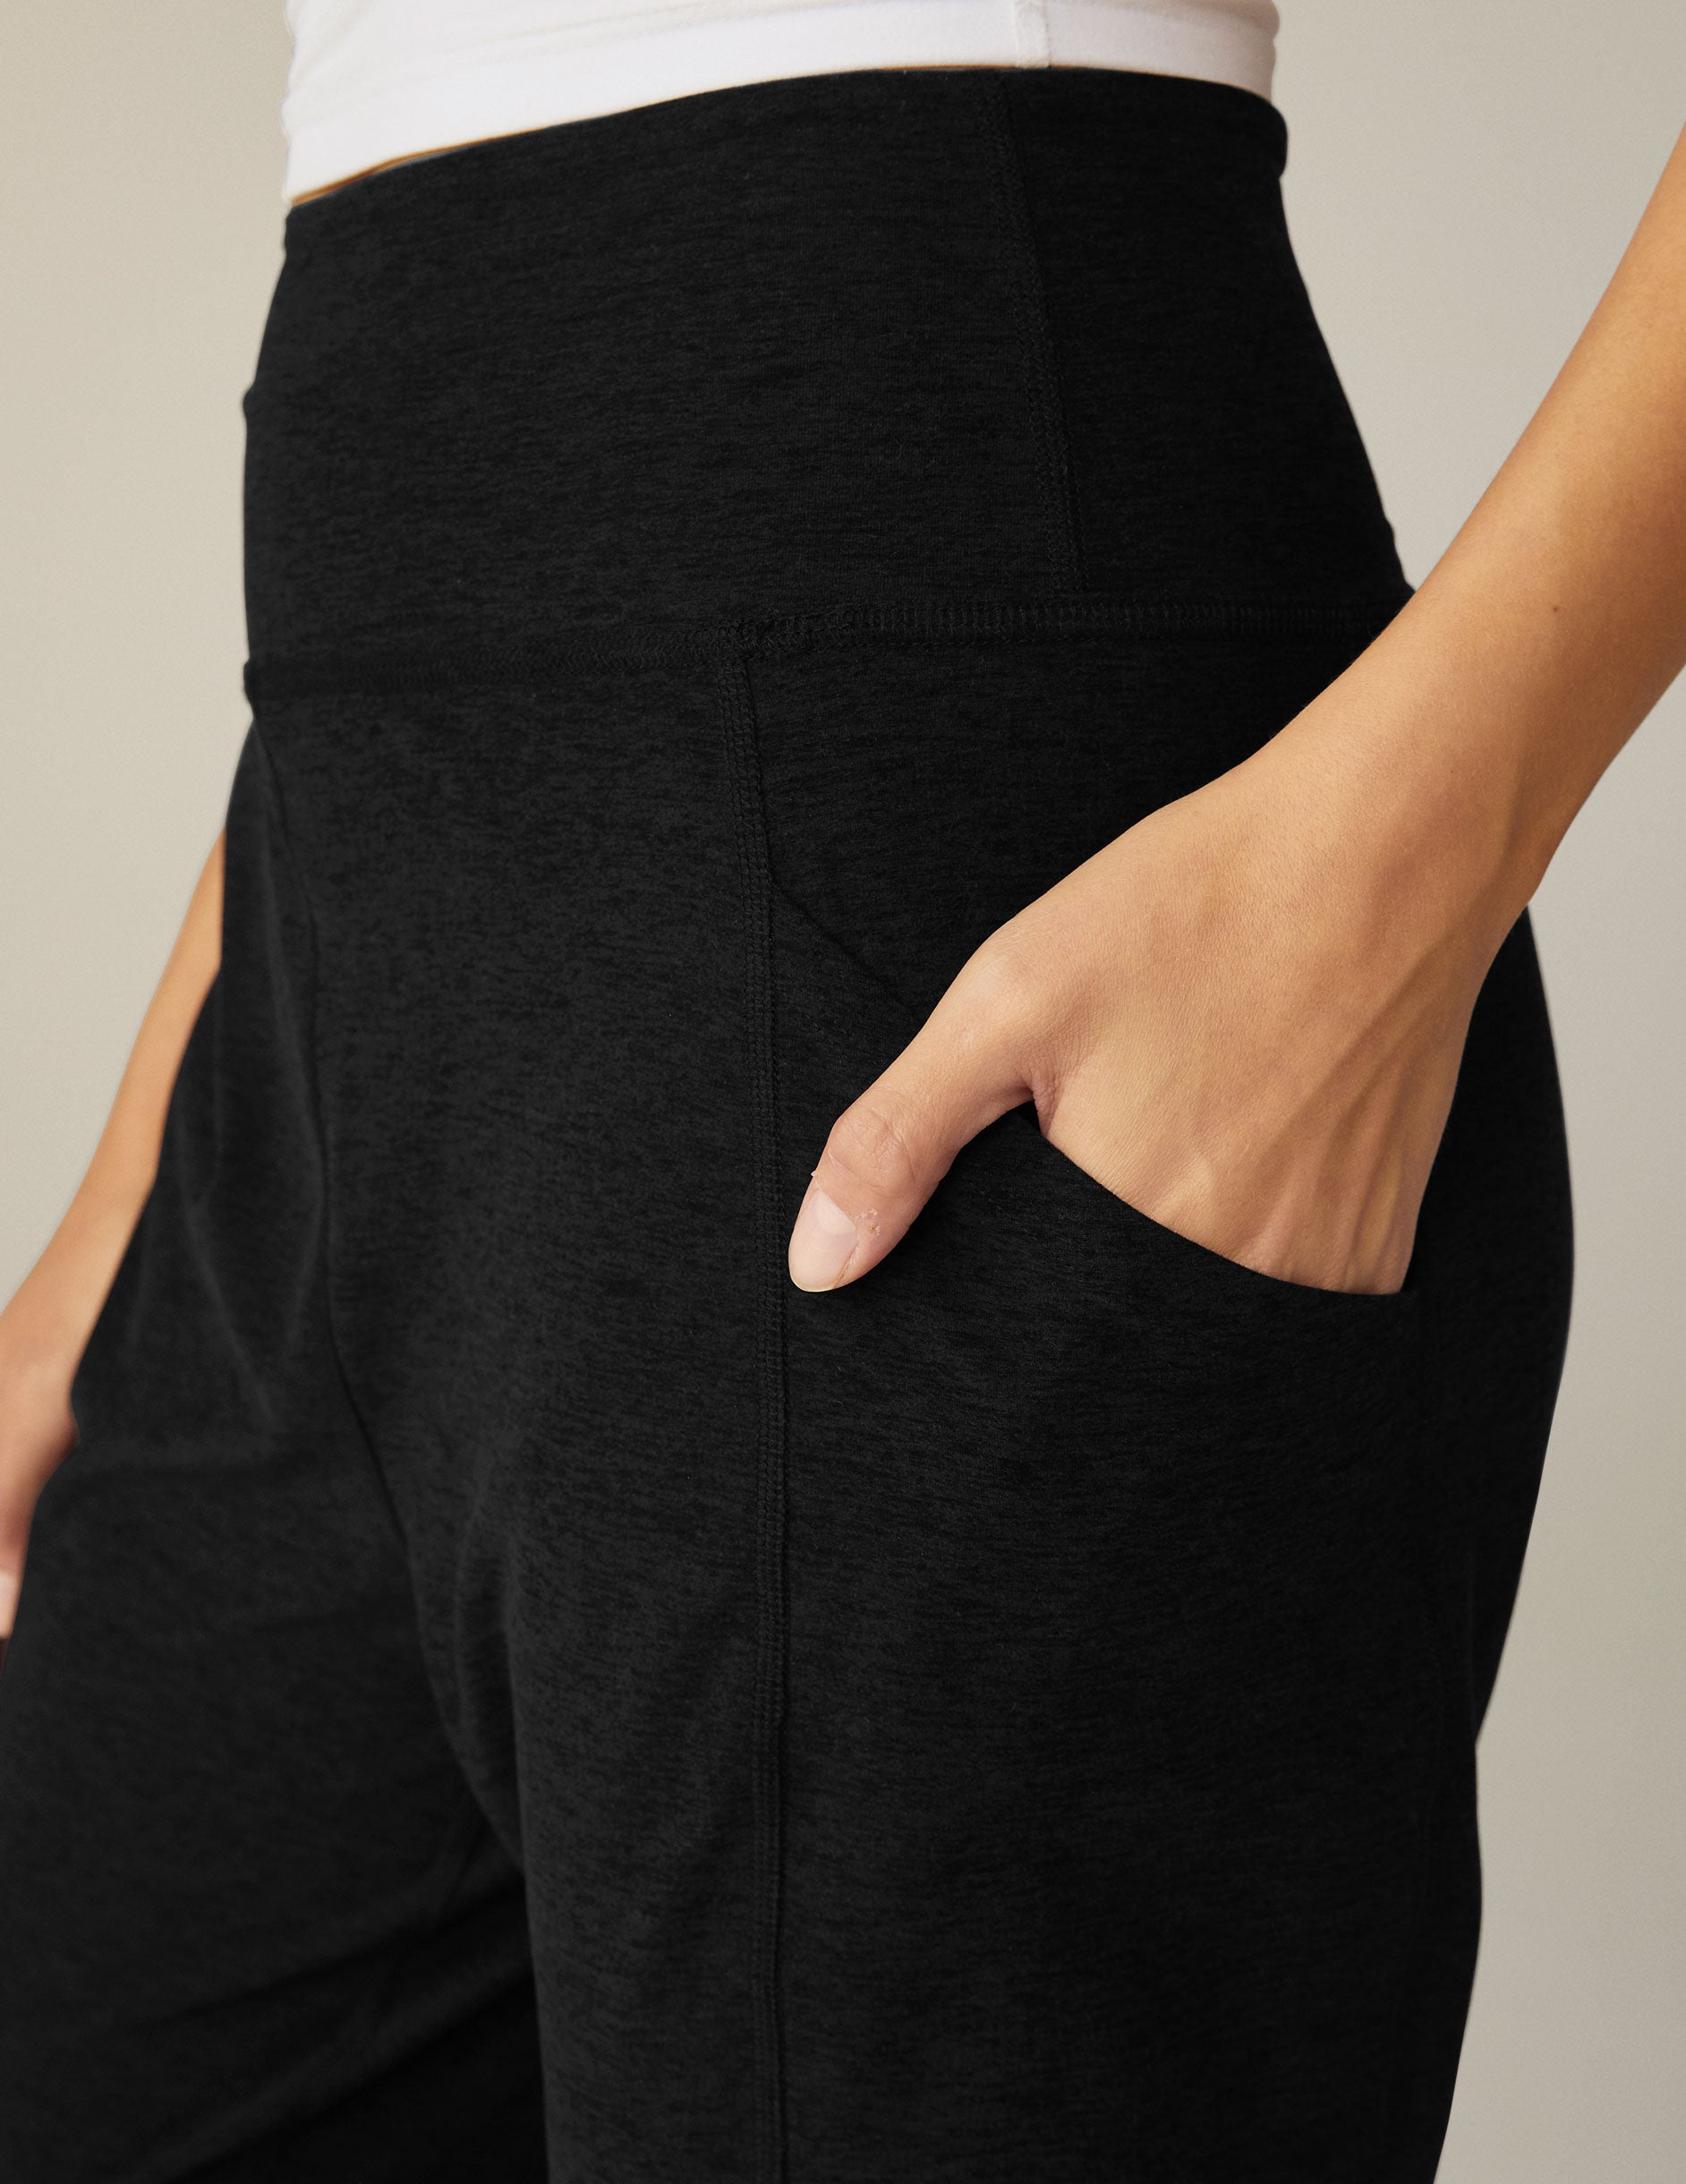 black midi joggers with pocket detail at sides